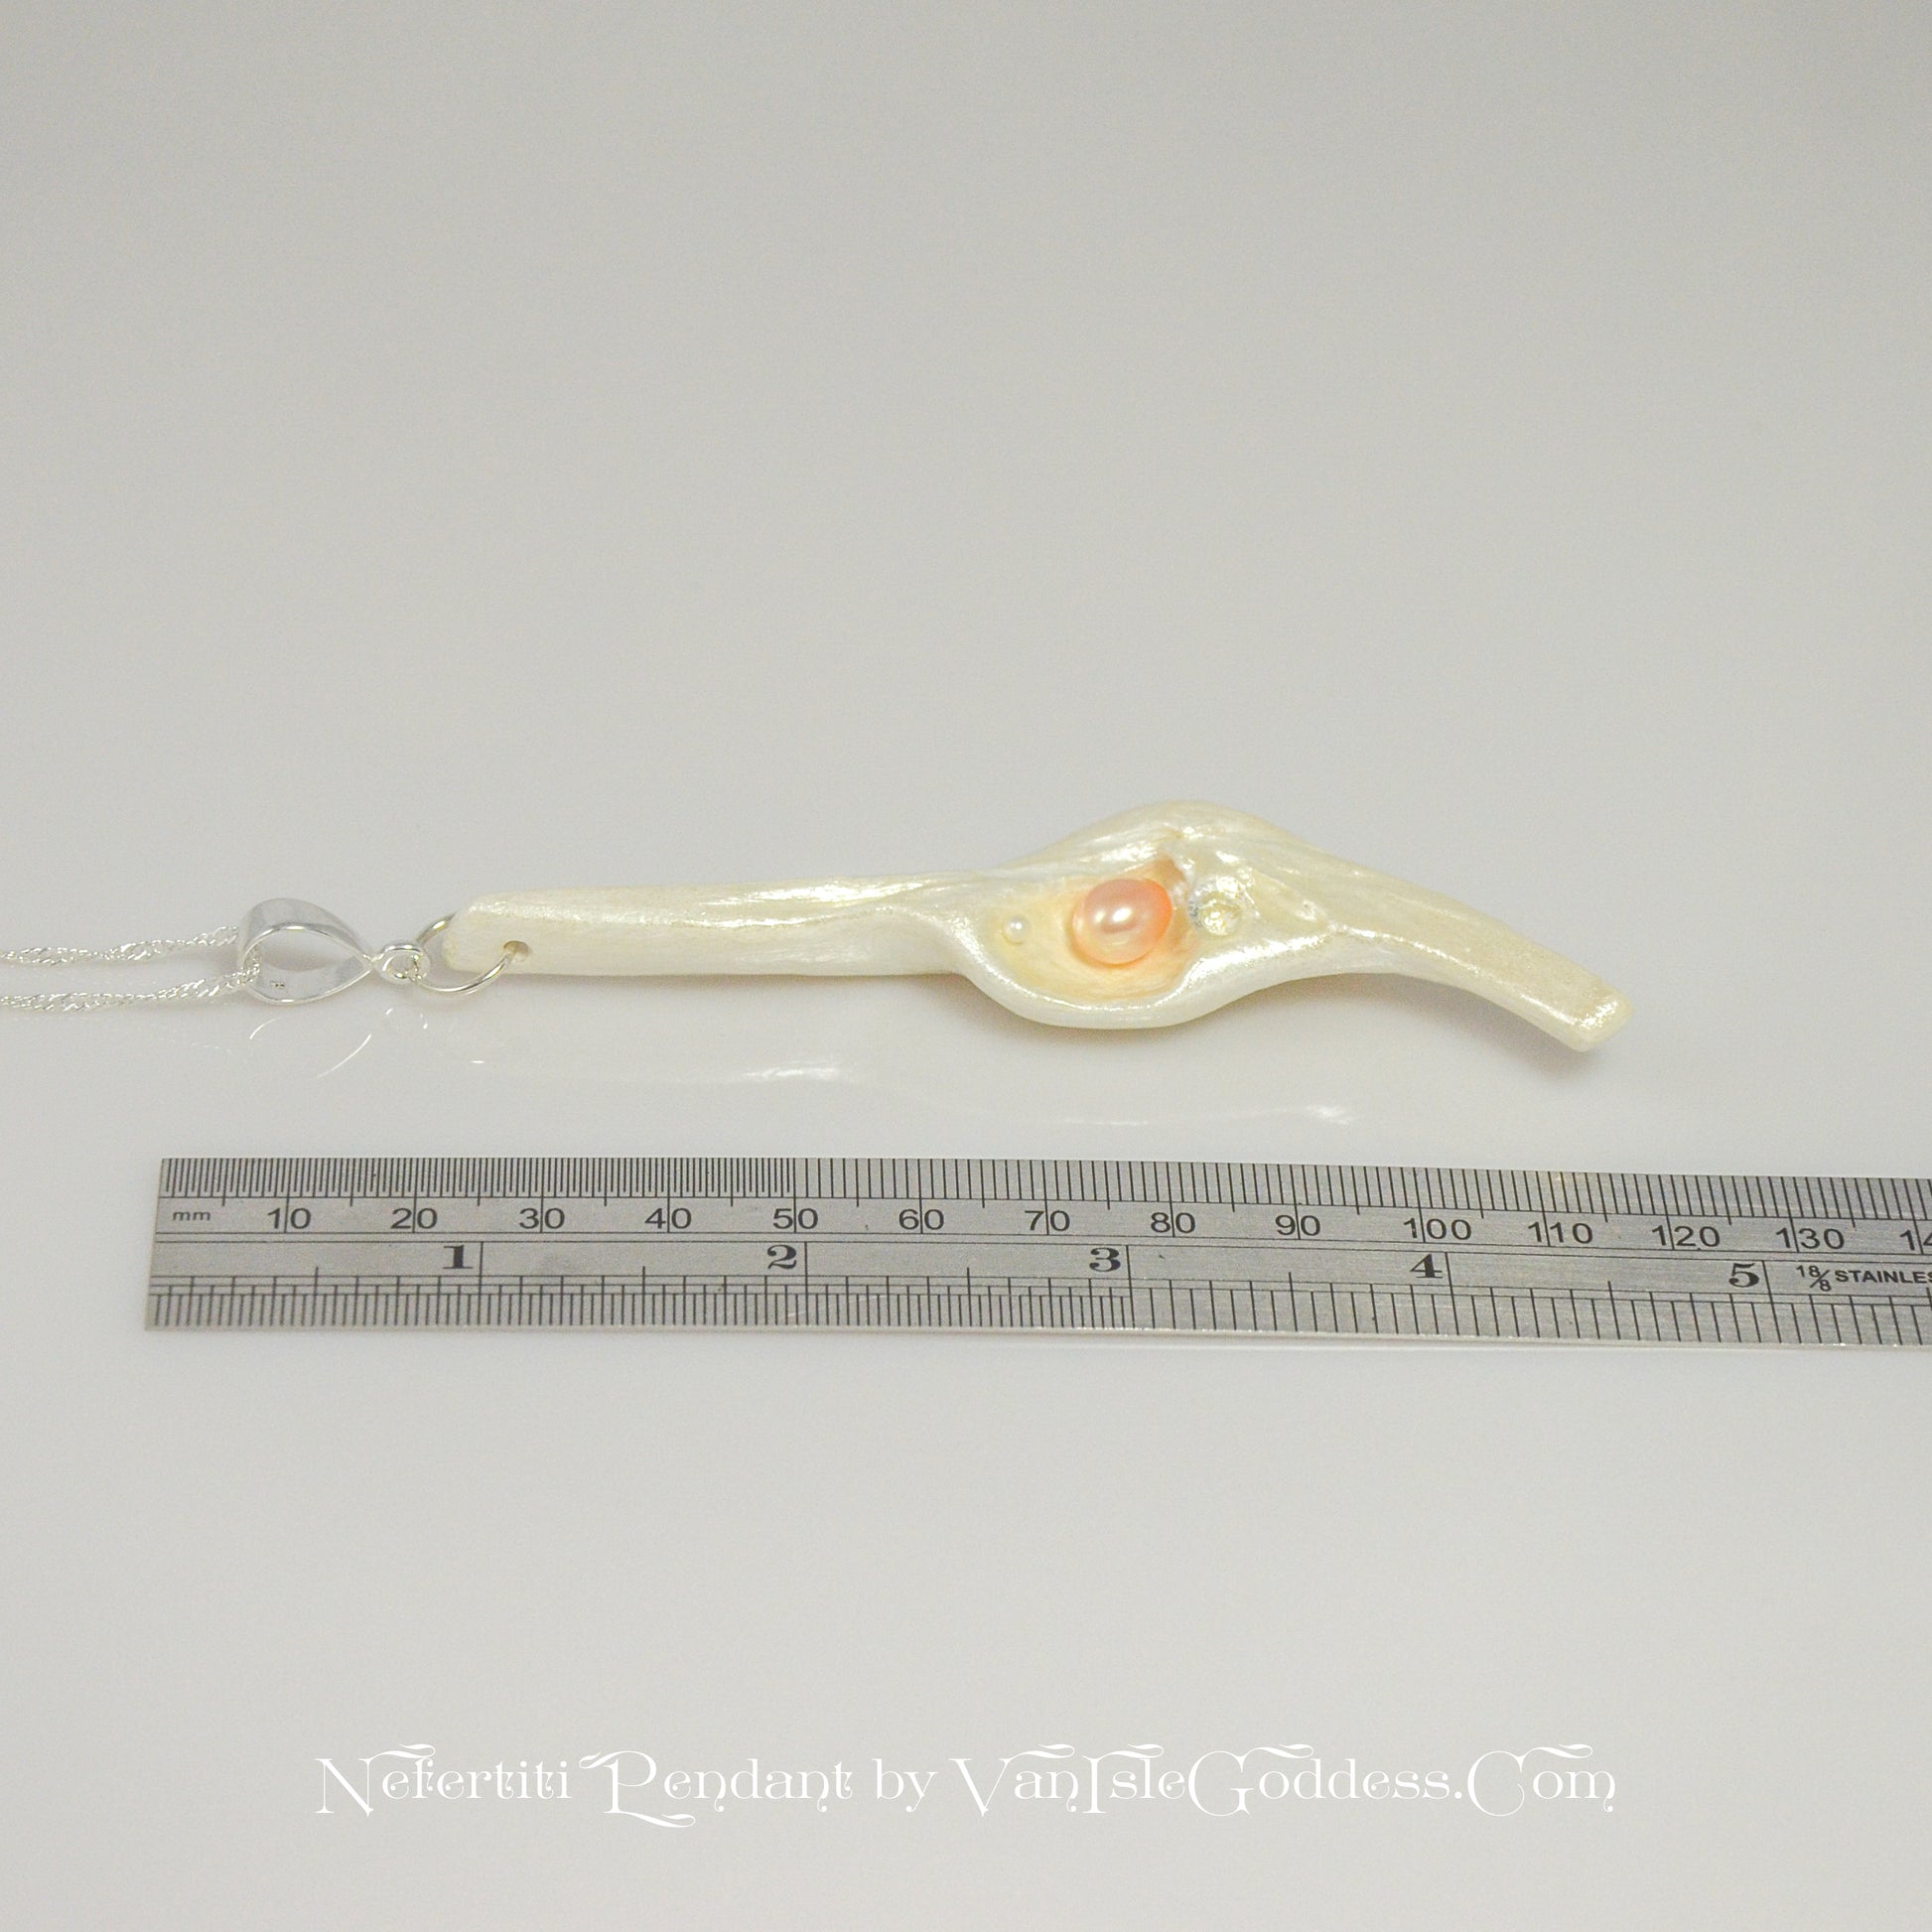 Nefertiti natural seashell and a real 8 mm pink freshwater Pearl, a baby pearl and a 5mm faceted Herkimer diamond compliments the pendant. The pendant is shown along side a ruler so the viewer can see the length of the pendant.